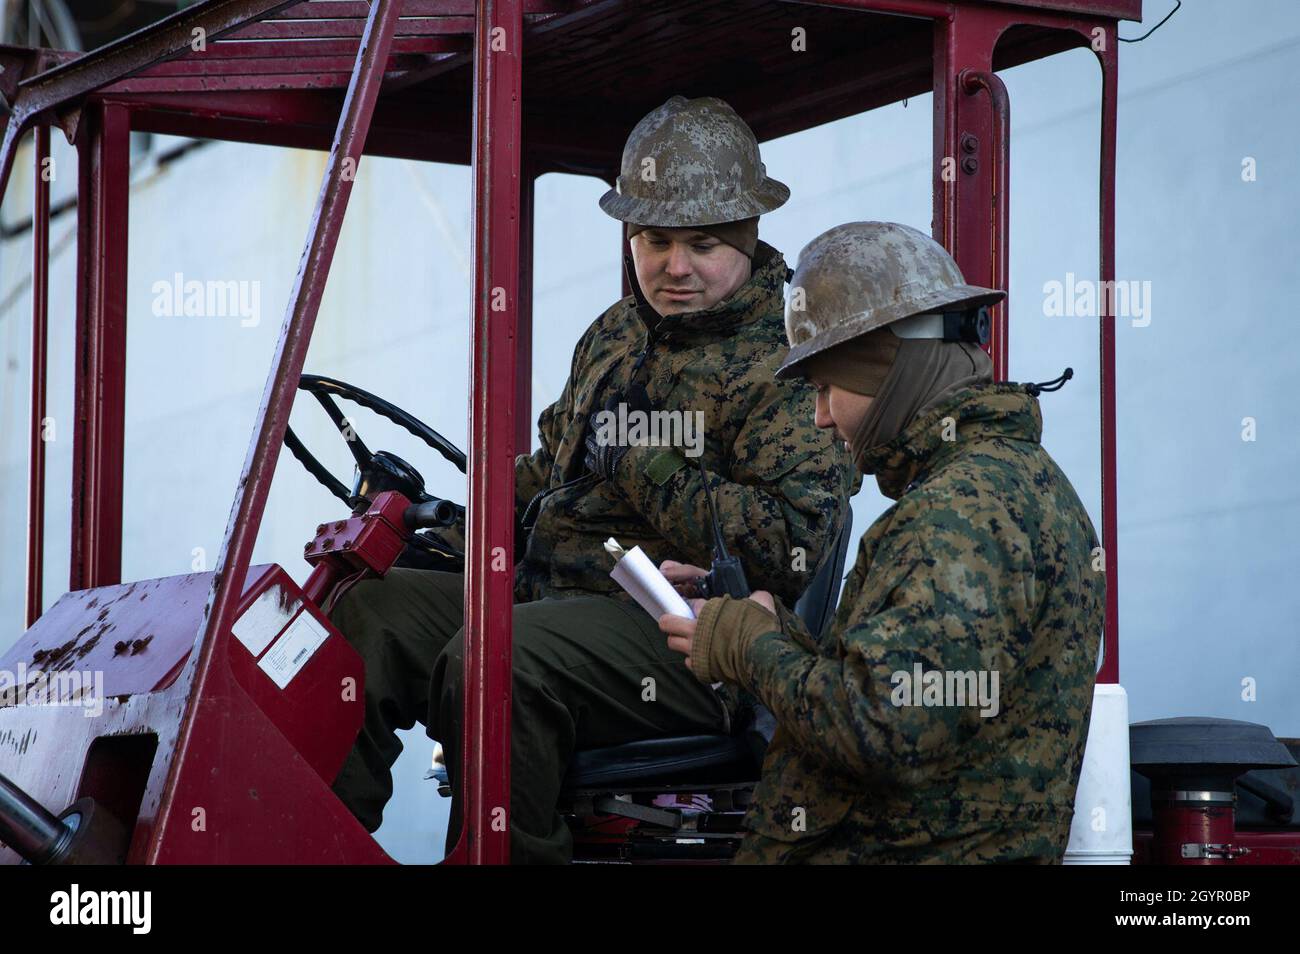 Marine Sgt. Justin Reeves, left, and Cpl. Jacob Nagele coordinate logistics in support of exercise Carolina Patriot 2020 in Philadelphia, Pennsylvania, Jan. 22, 2020. The exercise ensures 2nd Marine Aircraft Wing’s proficiency and readiness in aviation logistics support operations. Reeves is a mobile facility technician assigned to Marine Aviation Logistics Squadron (MALS) 31. Nagele is a mobile facility technician with MALS-41. (U.S. Marine Corps photo by Cpl. Cody Rowe) Stock Photo